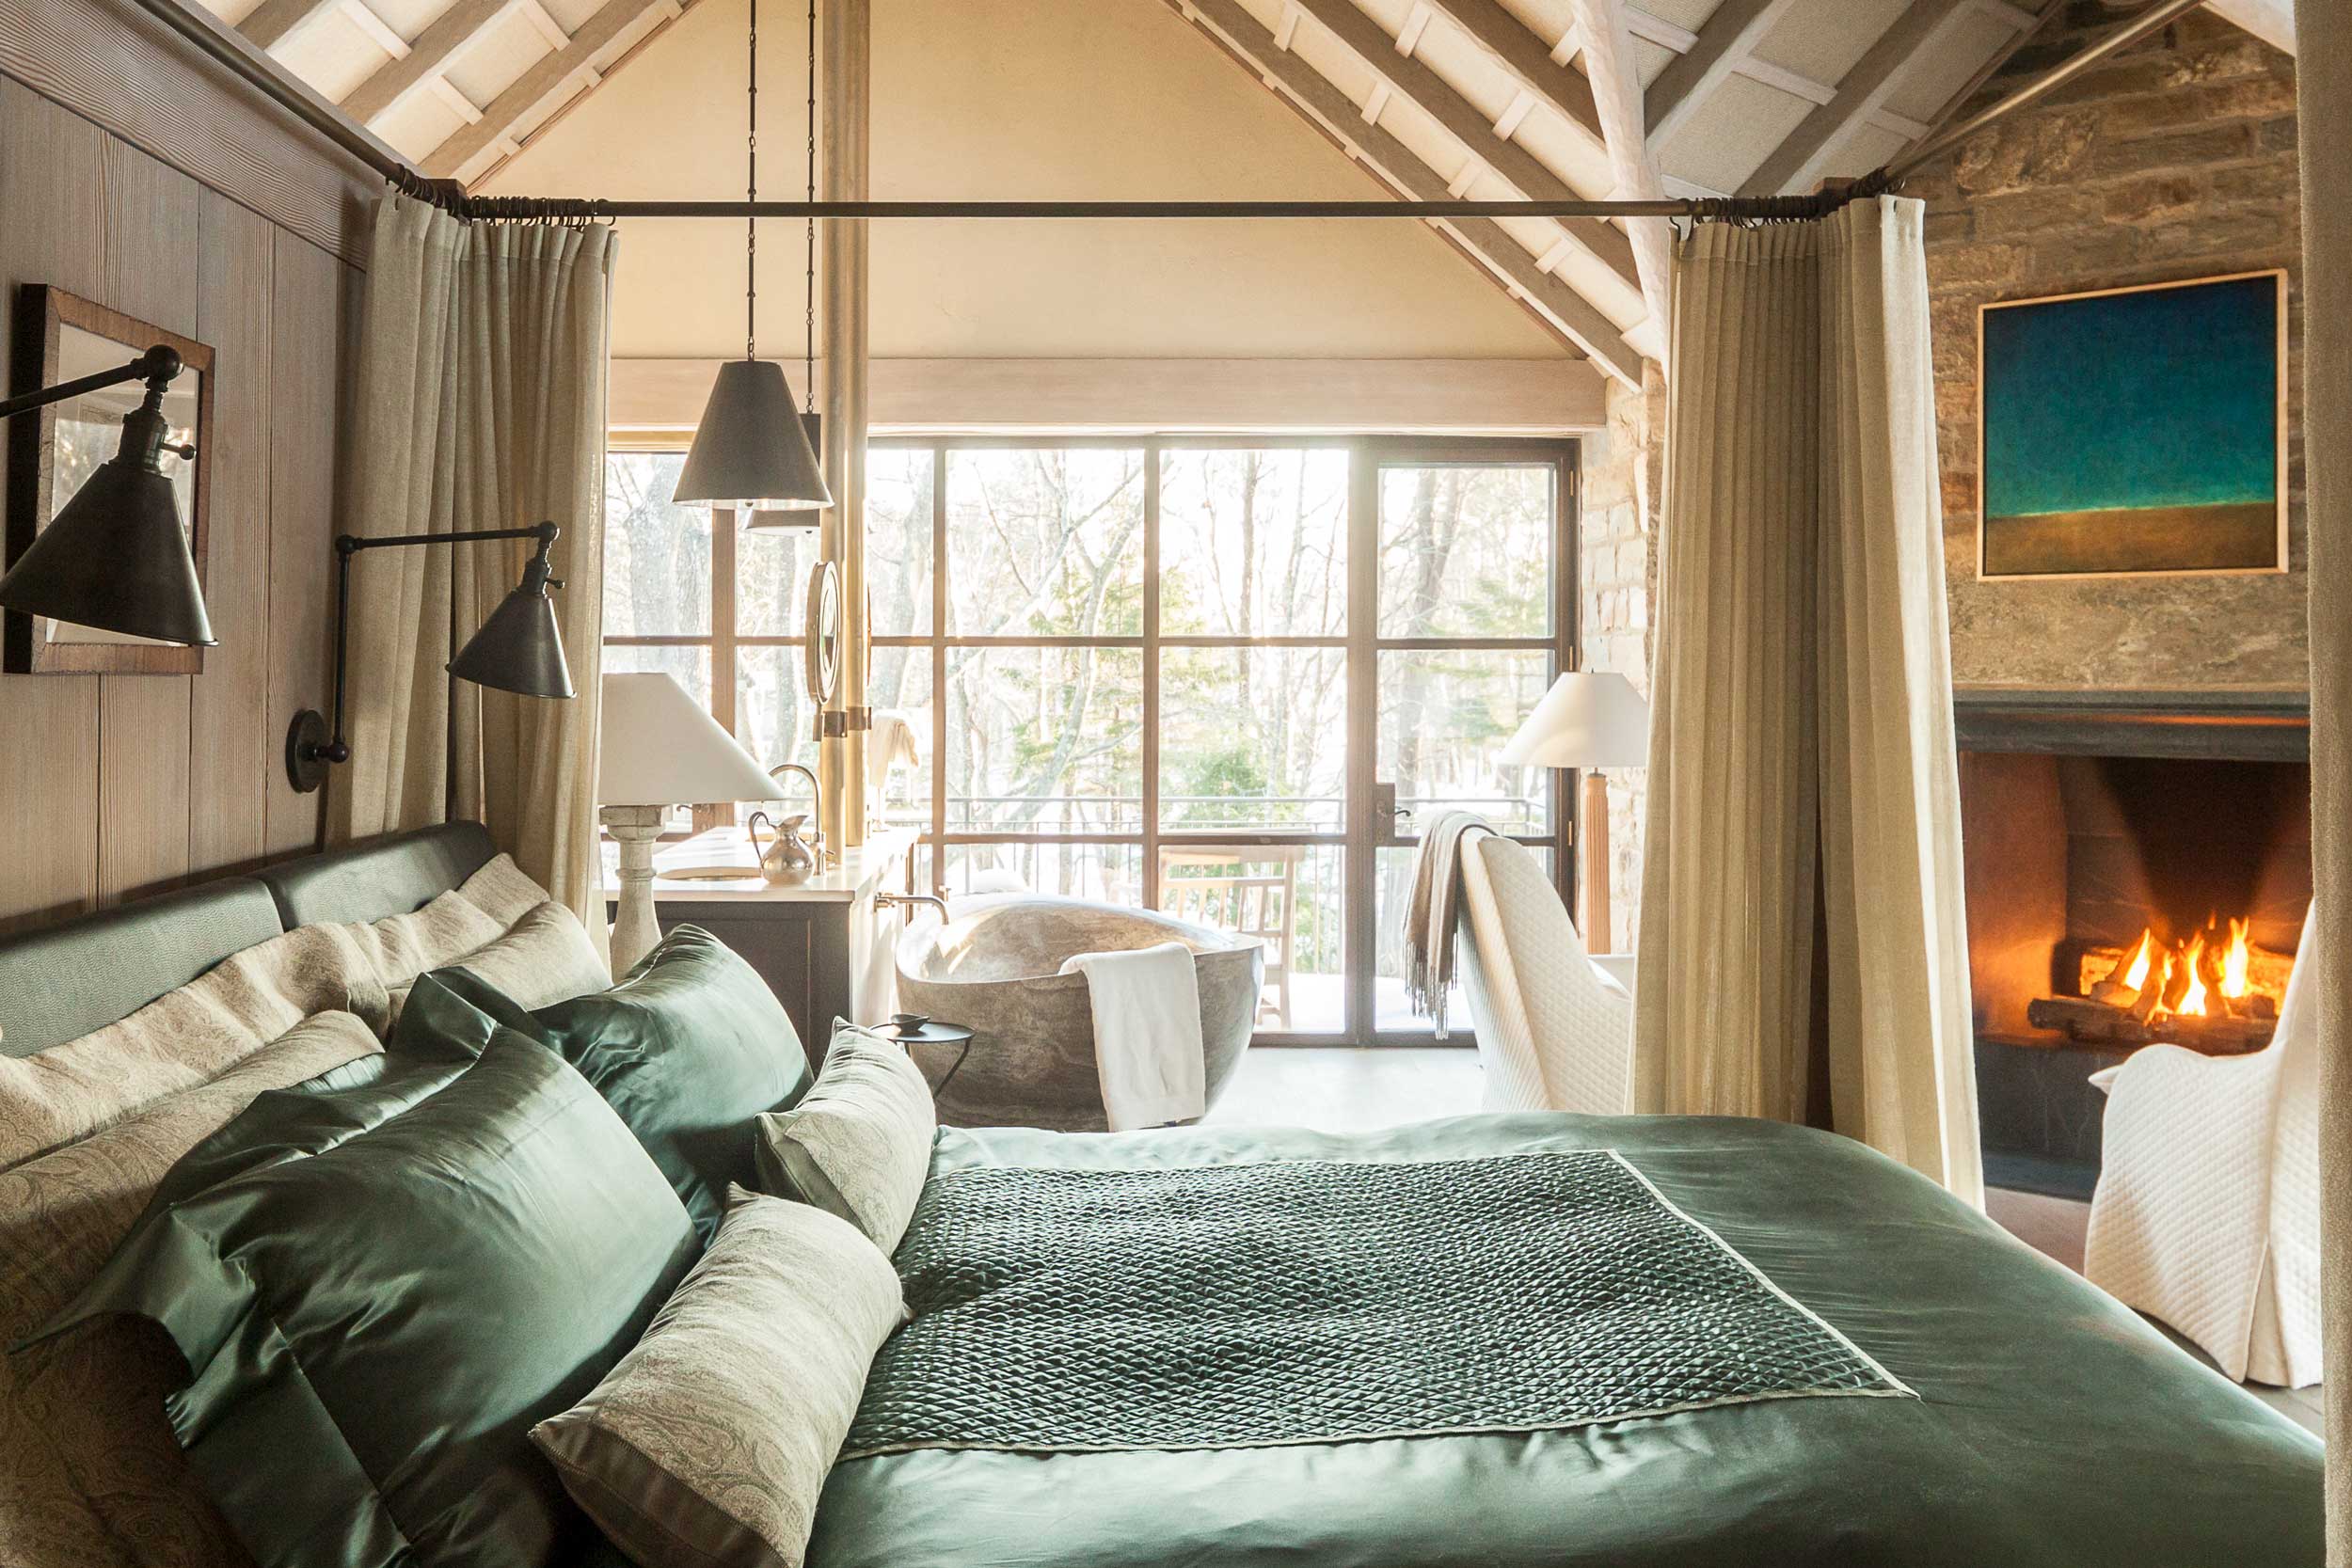 Vaulted ceilings in the master bedroom evoke the great lodges of the late 18th and early 20th centuries.